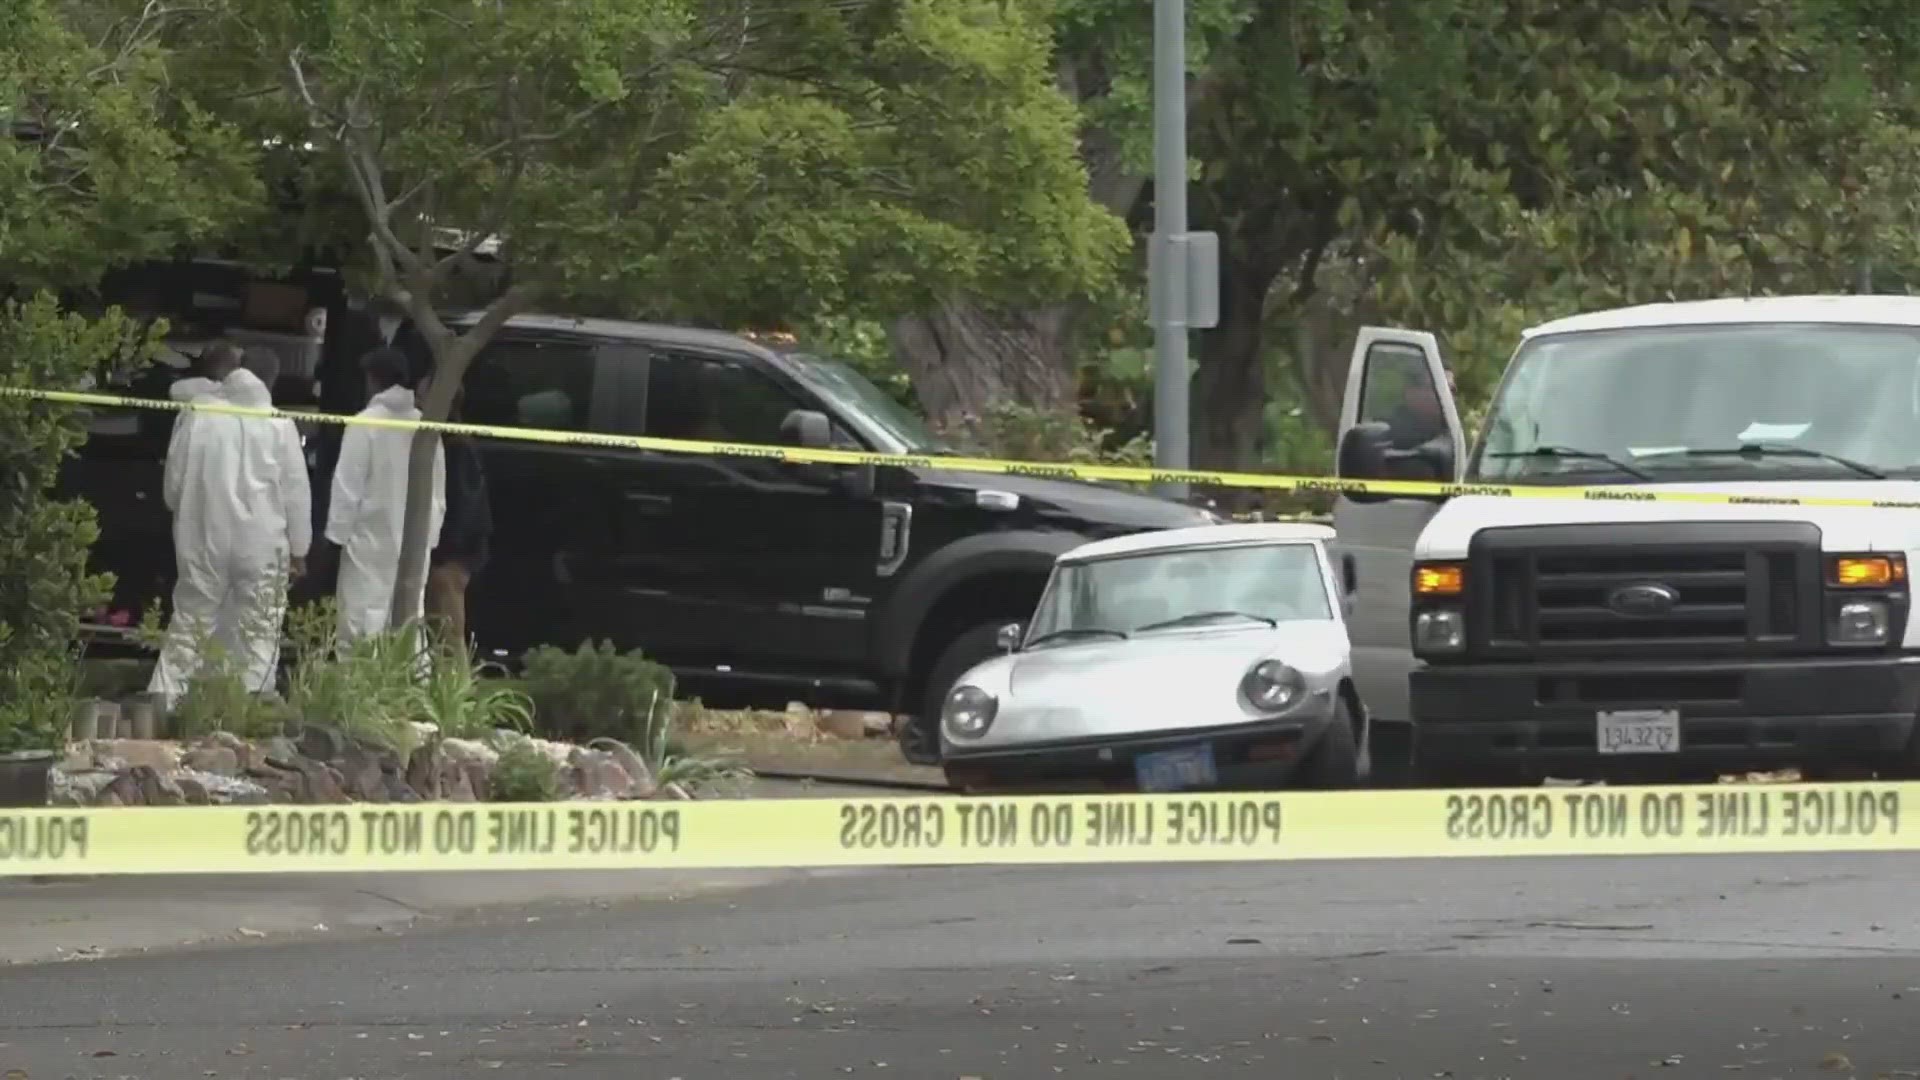 Police say an alleged serial killer has been arrested after a string of stabbings in Davis.